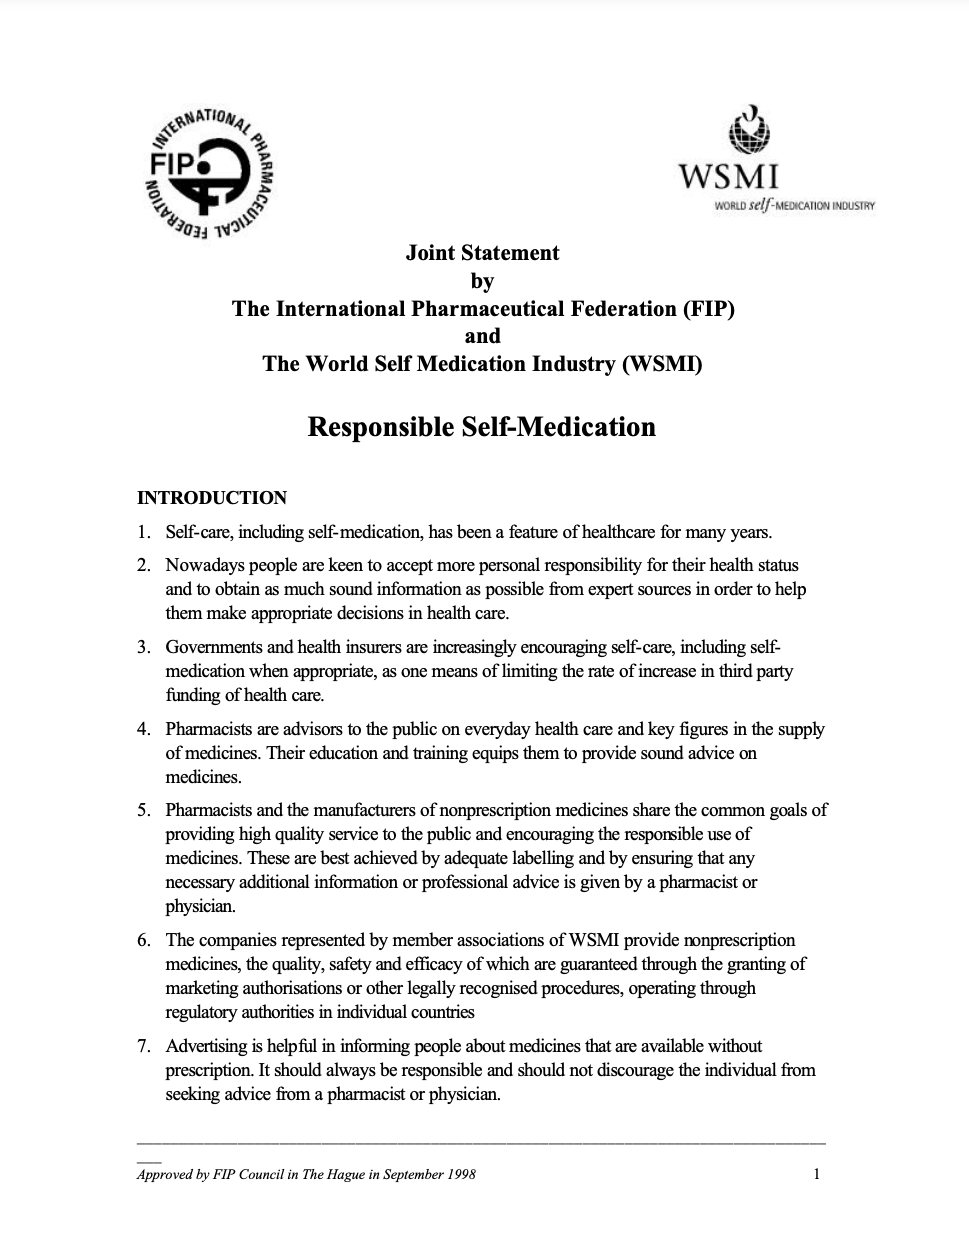 Joint Statement by the International Pharmaceutical Federation (FIP) and The World Self-Medication Industry (WSMI): Responsible Self-Medication (1998) Thumbnail